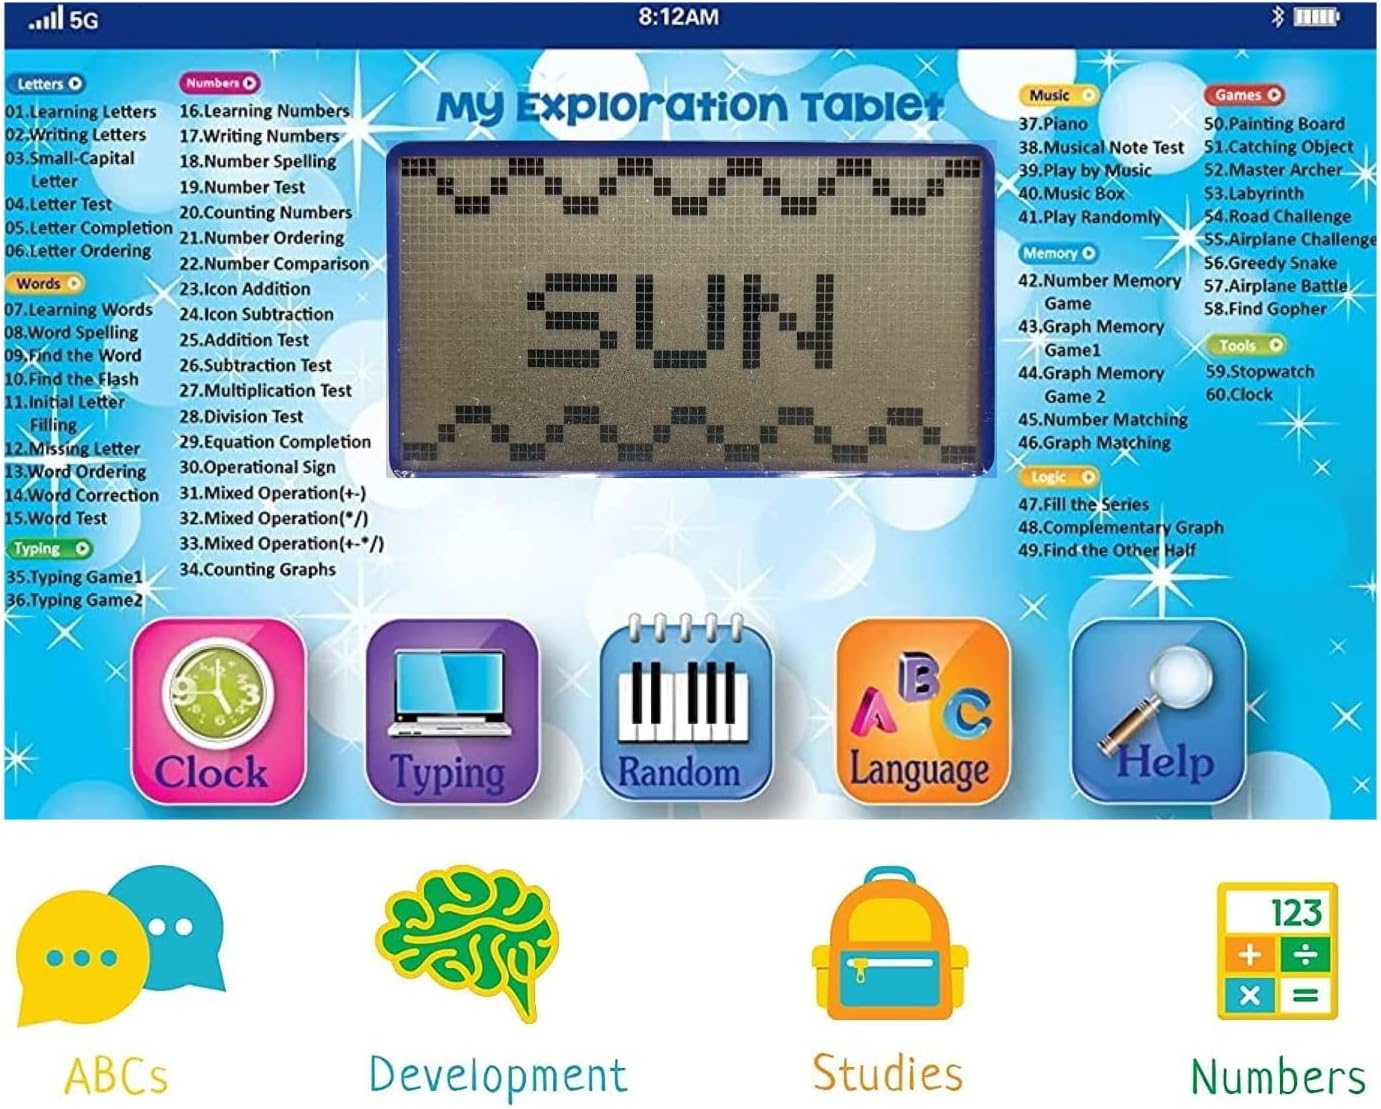 Tech Kidz My Exploration Toy Tablet Educational Learning Computer, 60 Challenging Learning Games and Activities, LCD Screen, Keyboard (Blue), Ages 3+